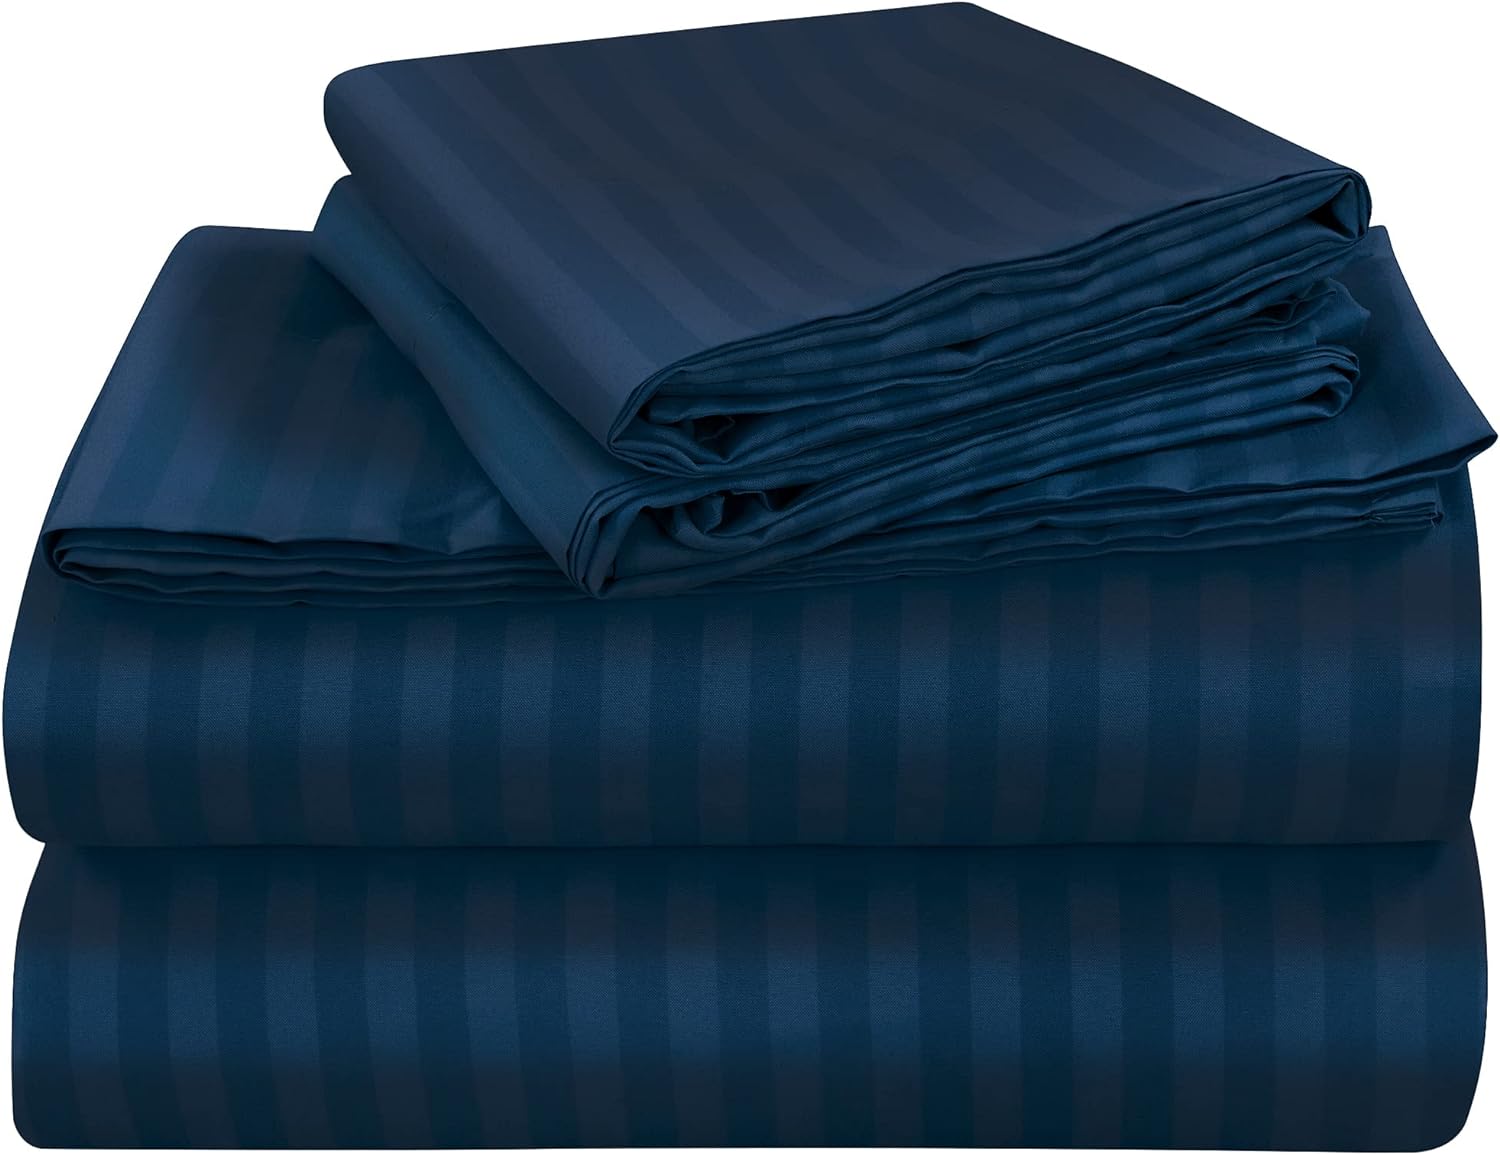 ROYALE LINENS Striped Bed Sheet Set - Brushed Microfiber 1800 Bedding - 1 Fitted Sheet, 1 Flat Sheet, 1 Pillow case - Wrinkle Resistant - 3 Piece Damask Stripe Twin XL Bed Sheet Set (Twin XL, Navy)